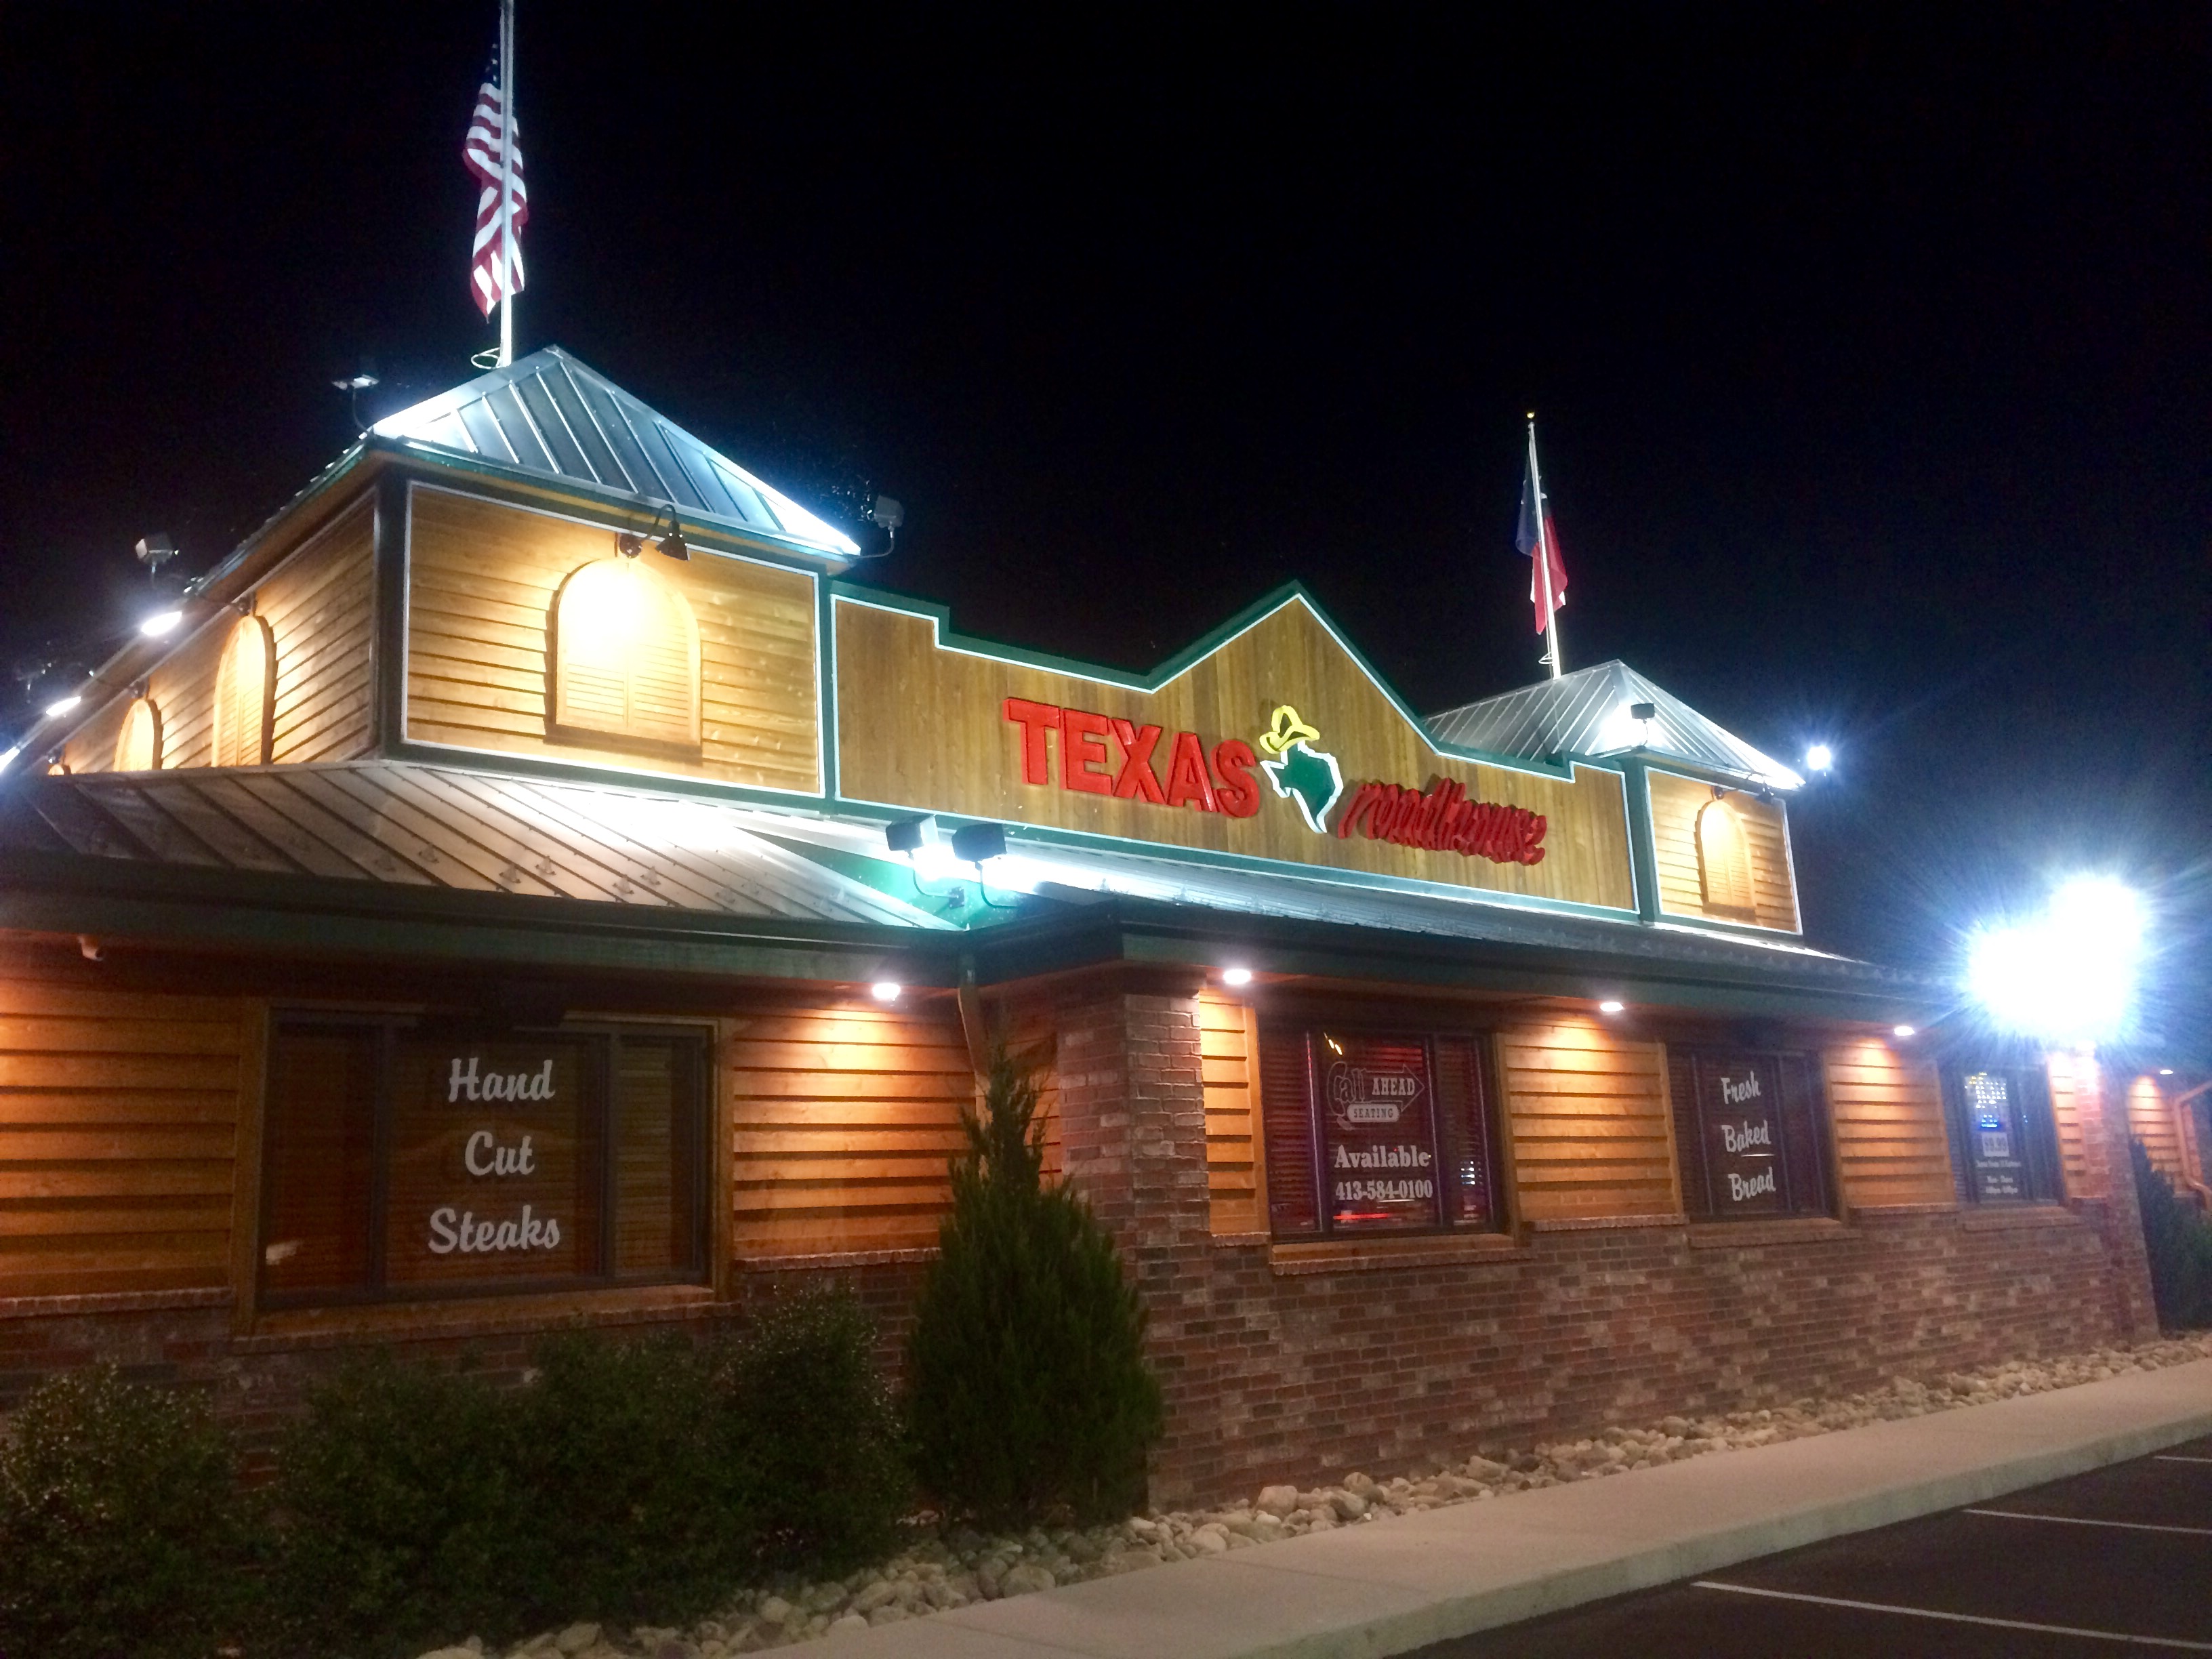 Texas Roadhouse and the End of America